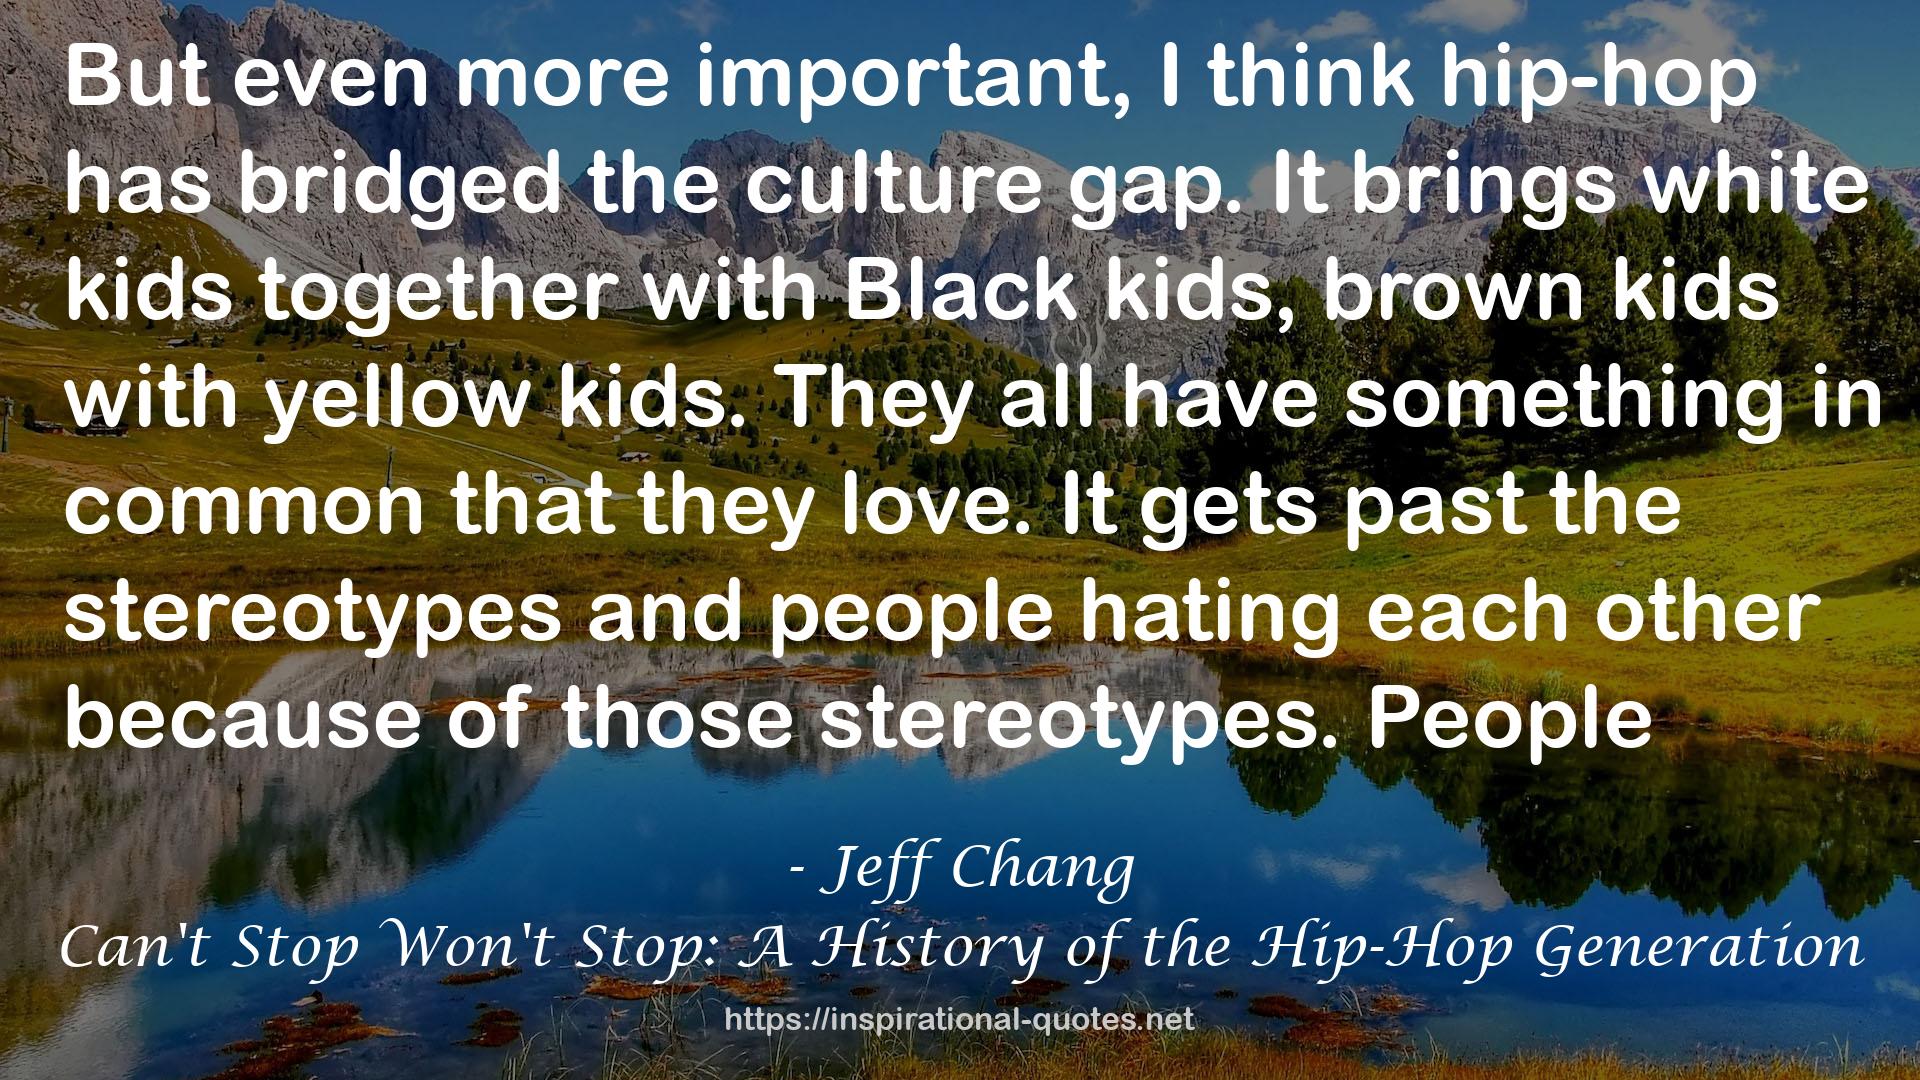 Can't Stop Won't Stop: A History of the Hip-Hop Generation QUOTES